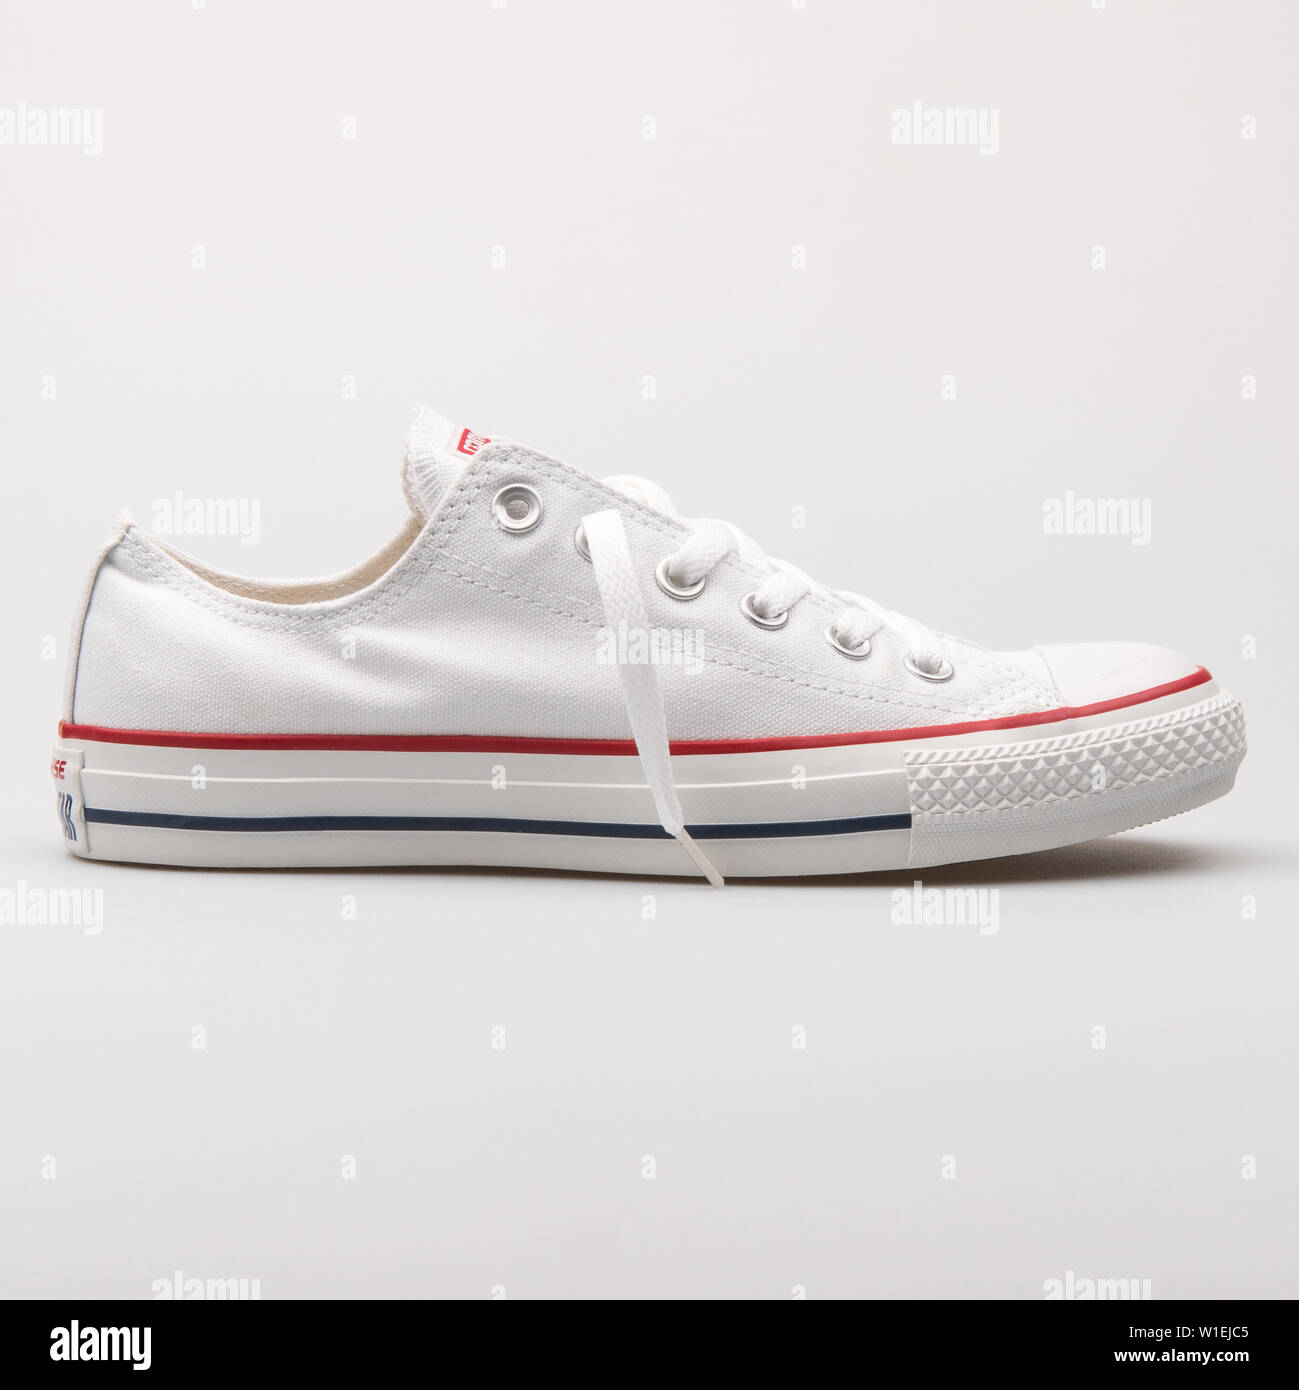 VIENNA, AUSTRIA - AUGUST 23, 2017: Converse Chuck Taylor All Star OX white  sneaker on white background Stock Photo - Alamy